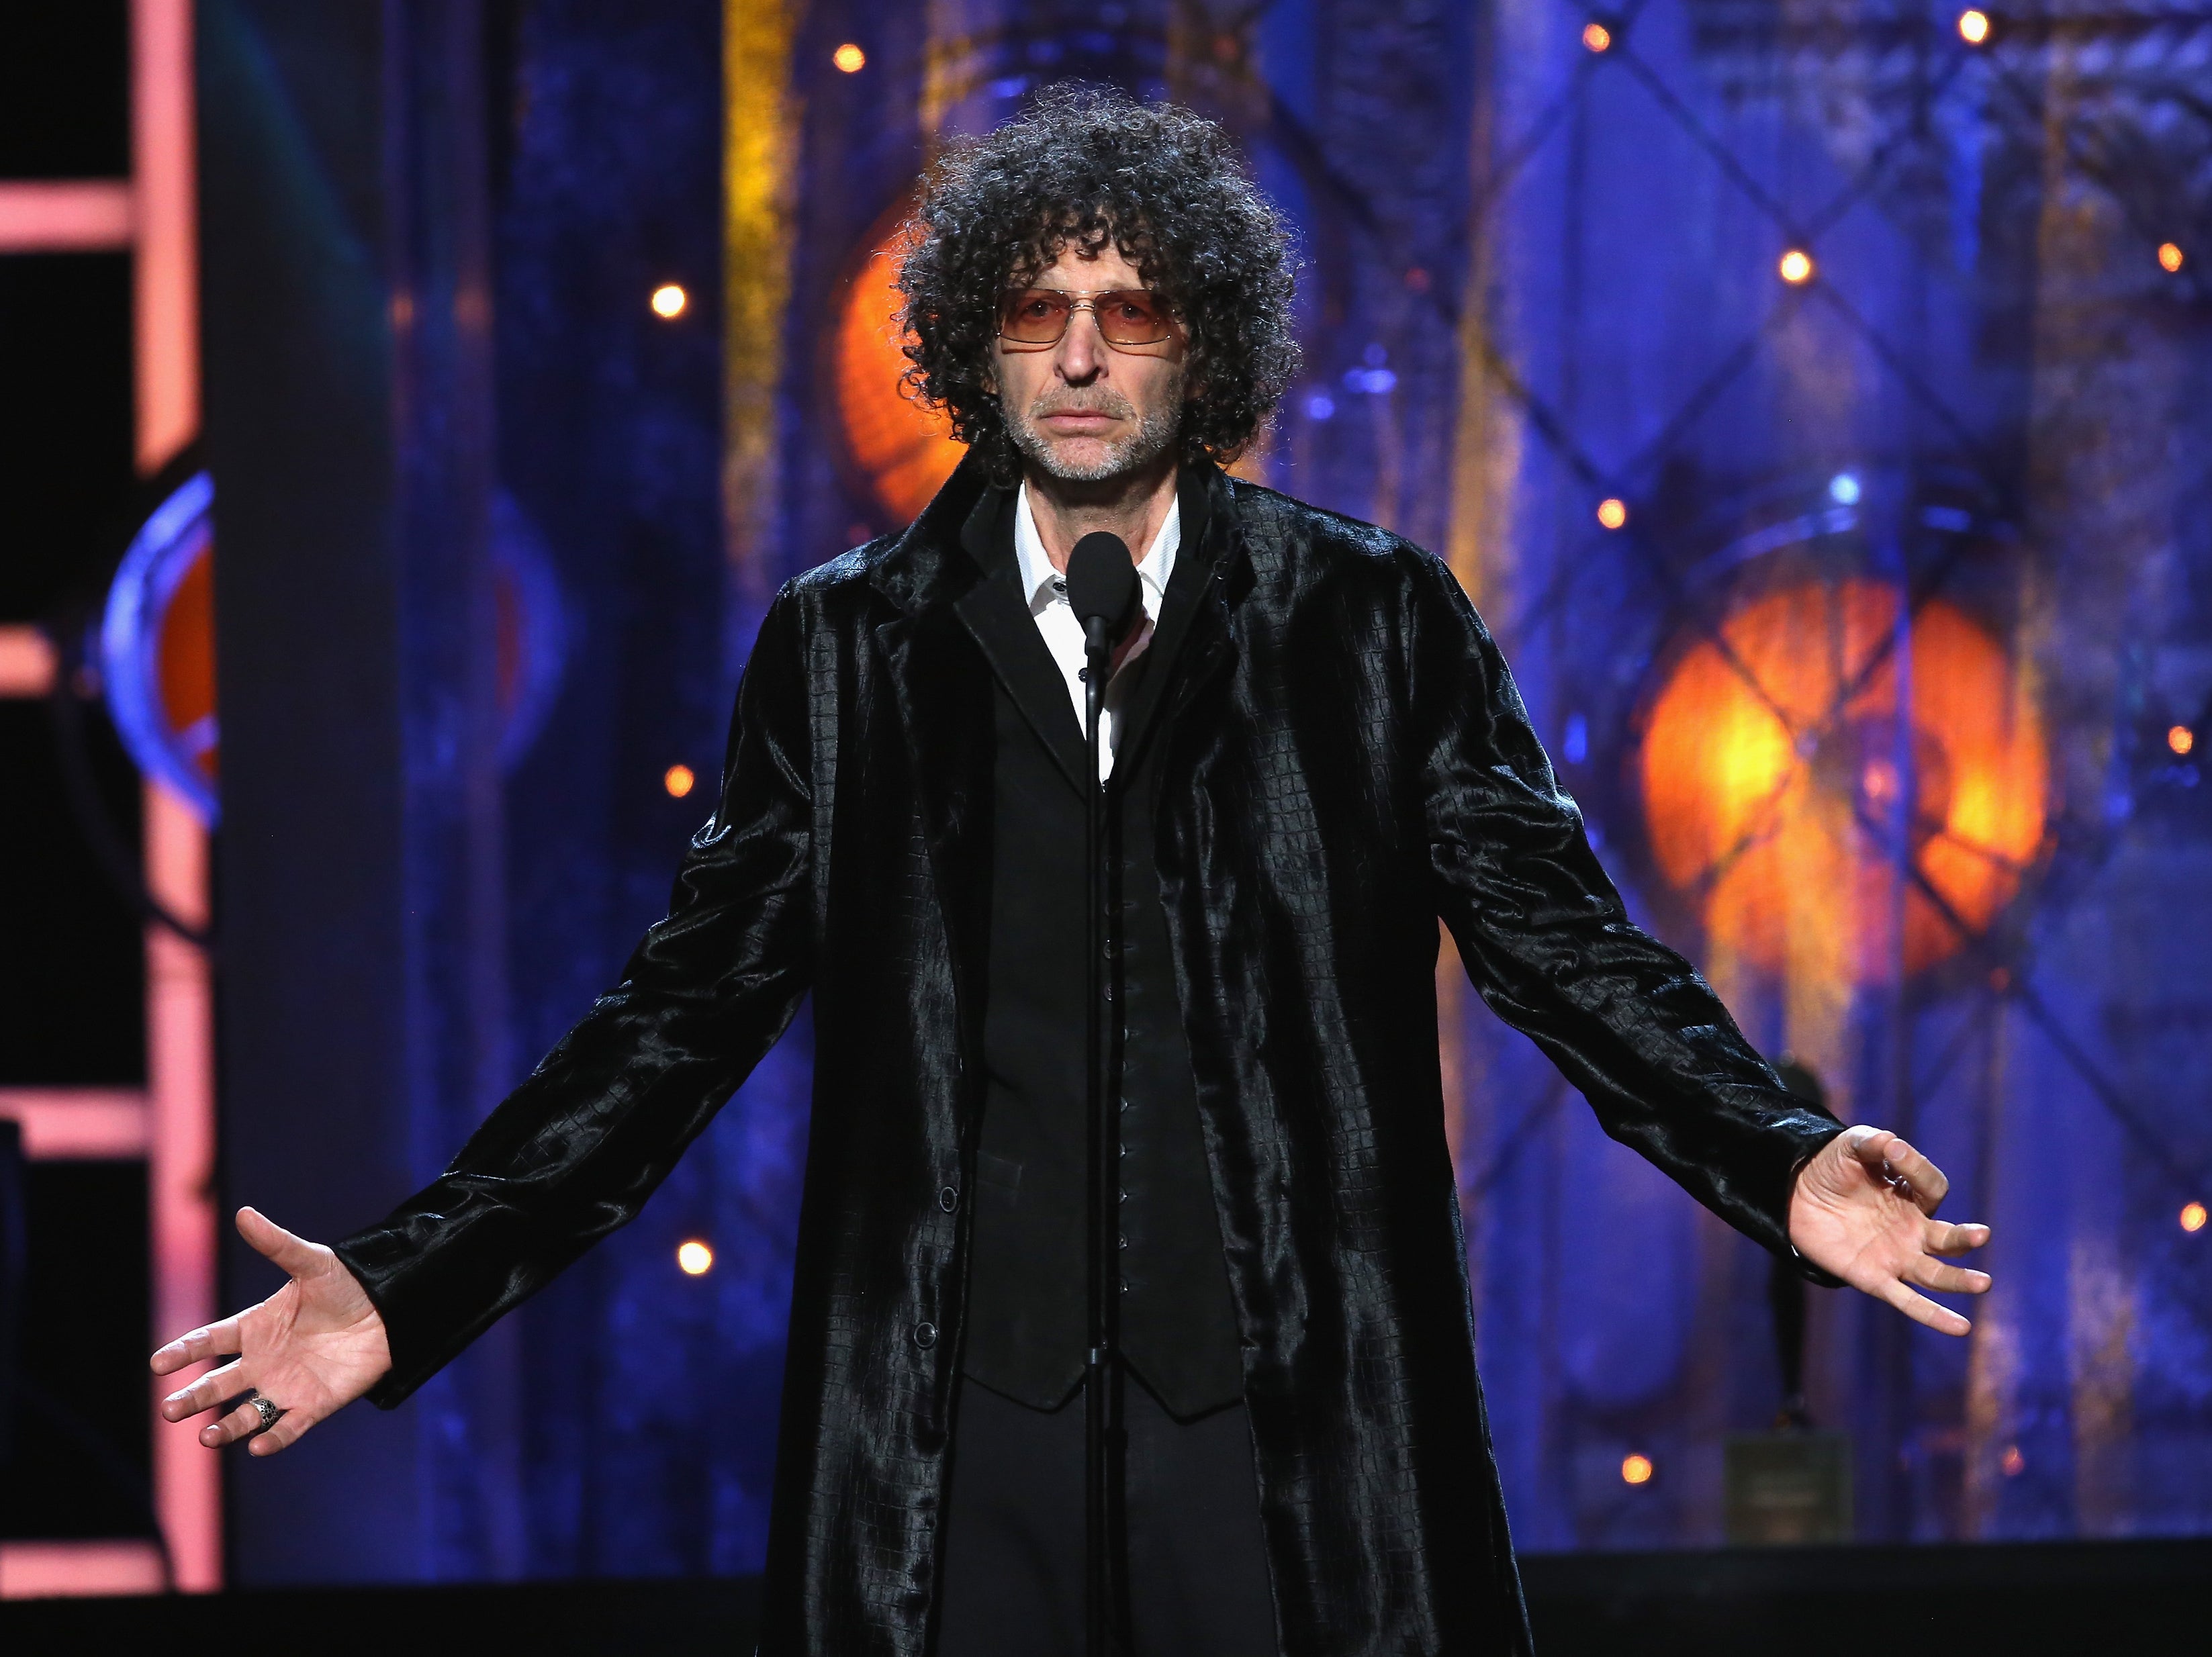 Howard Stern defends twomonthlong vacation from radio job he’s paid